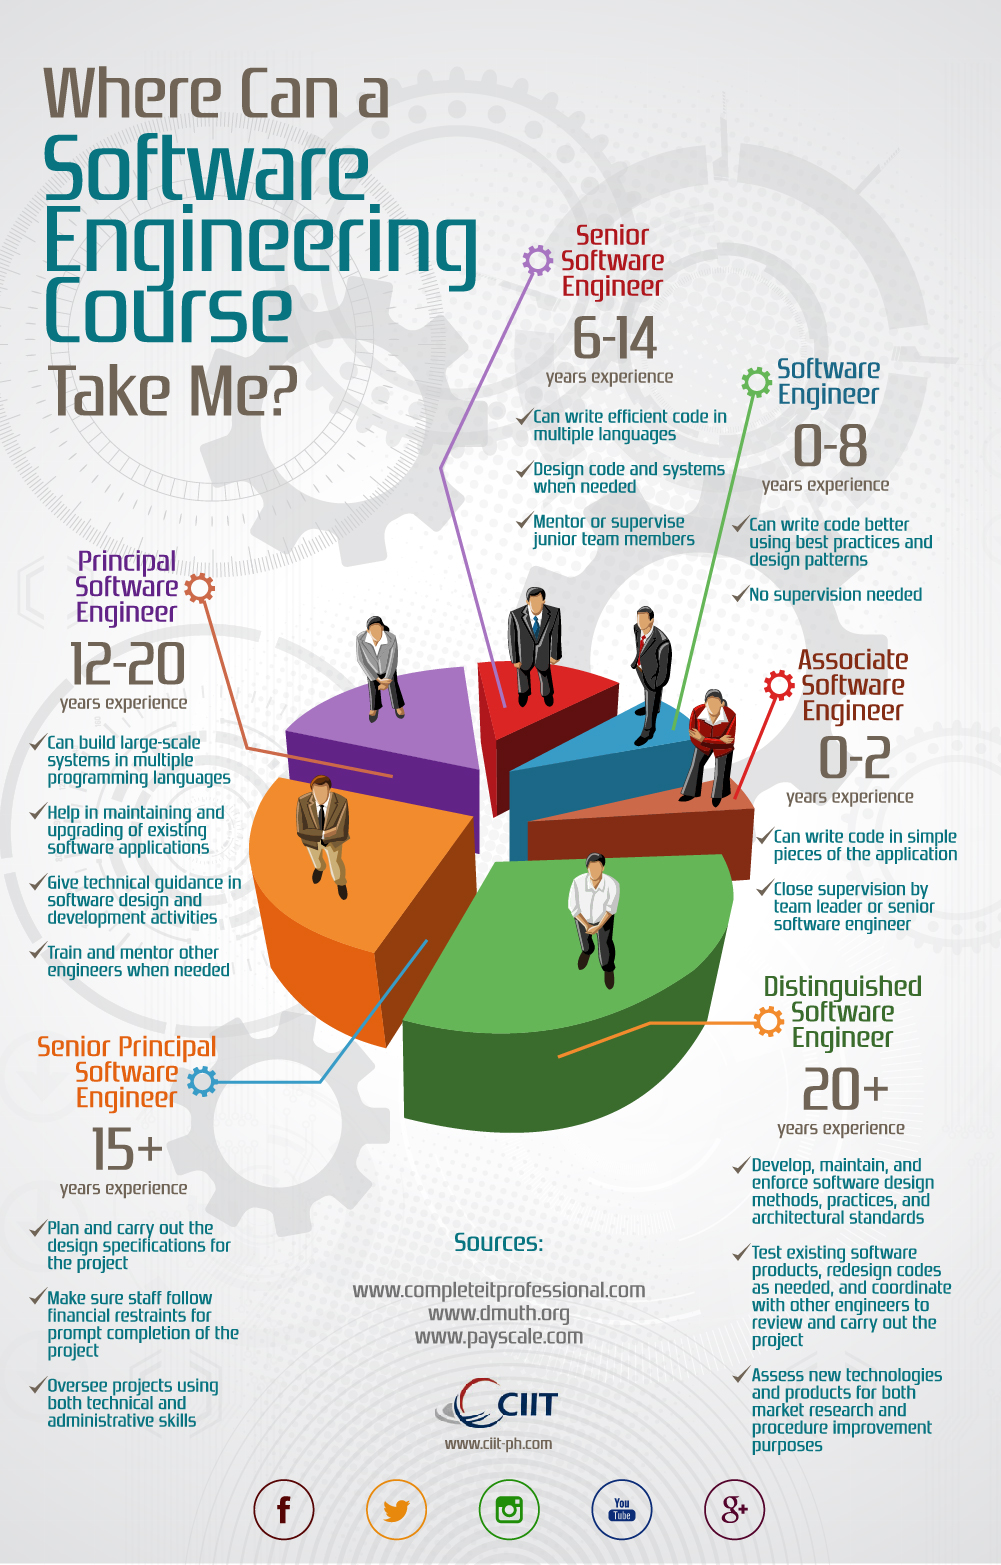 Where Can a Software Engineering Course Take Me? [Infographic] Visual.ly